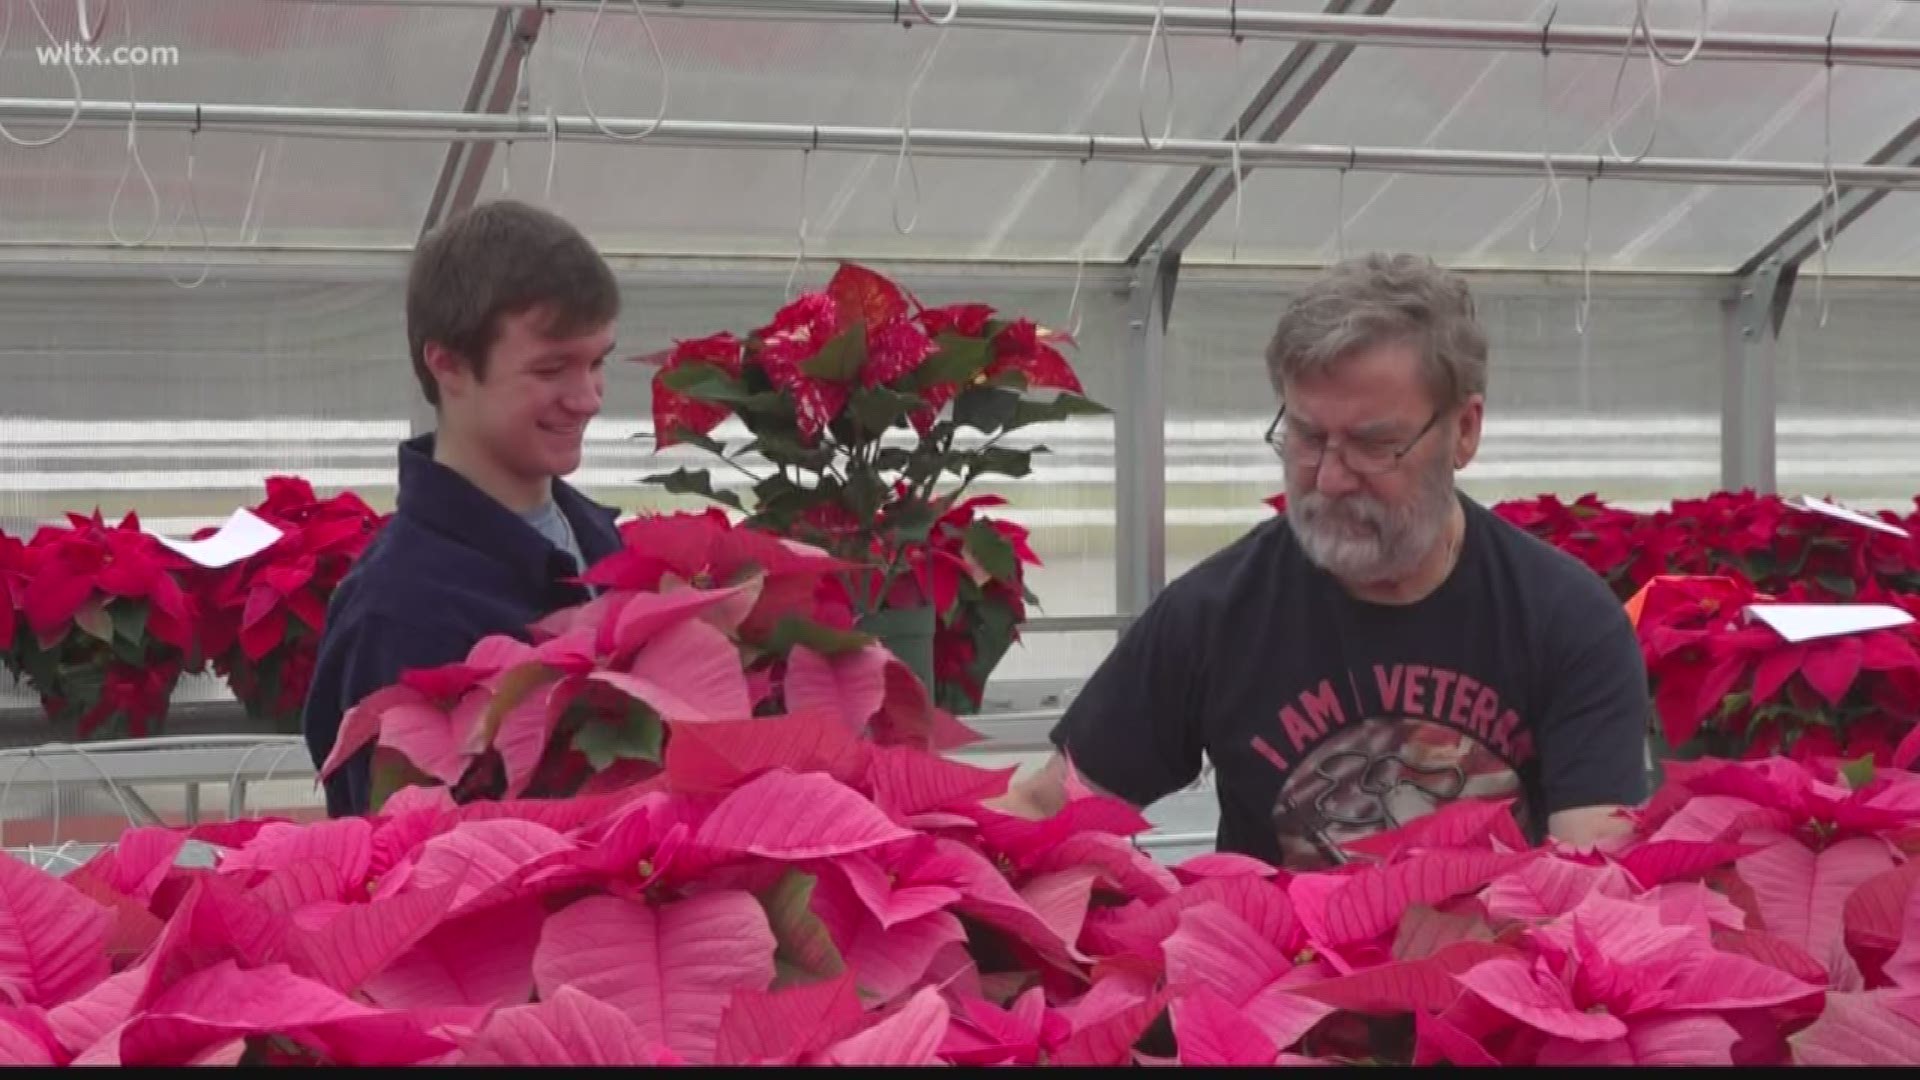 We start off the first week of August we get 800 cuttings for the poinsettias, we plant them in the pots and we disperse them around the greenhouse.